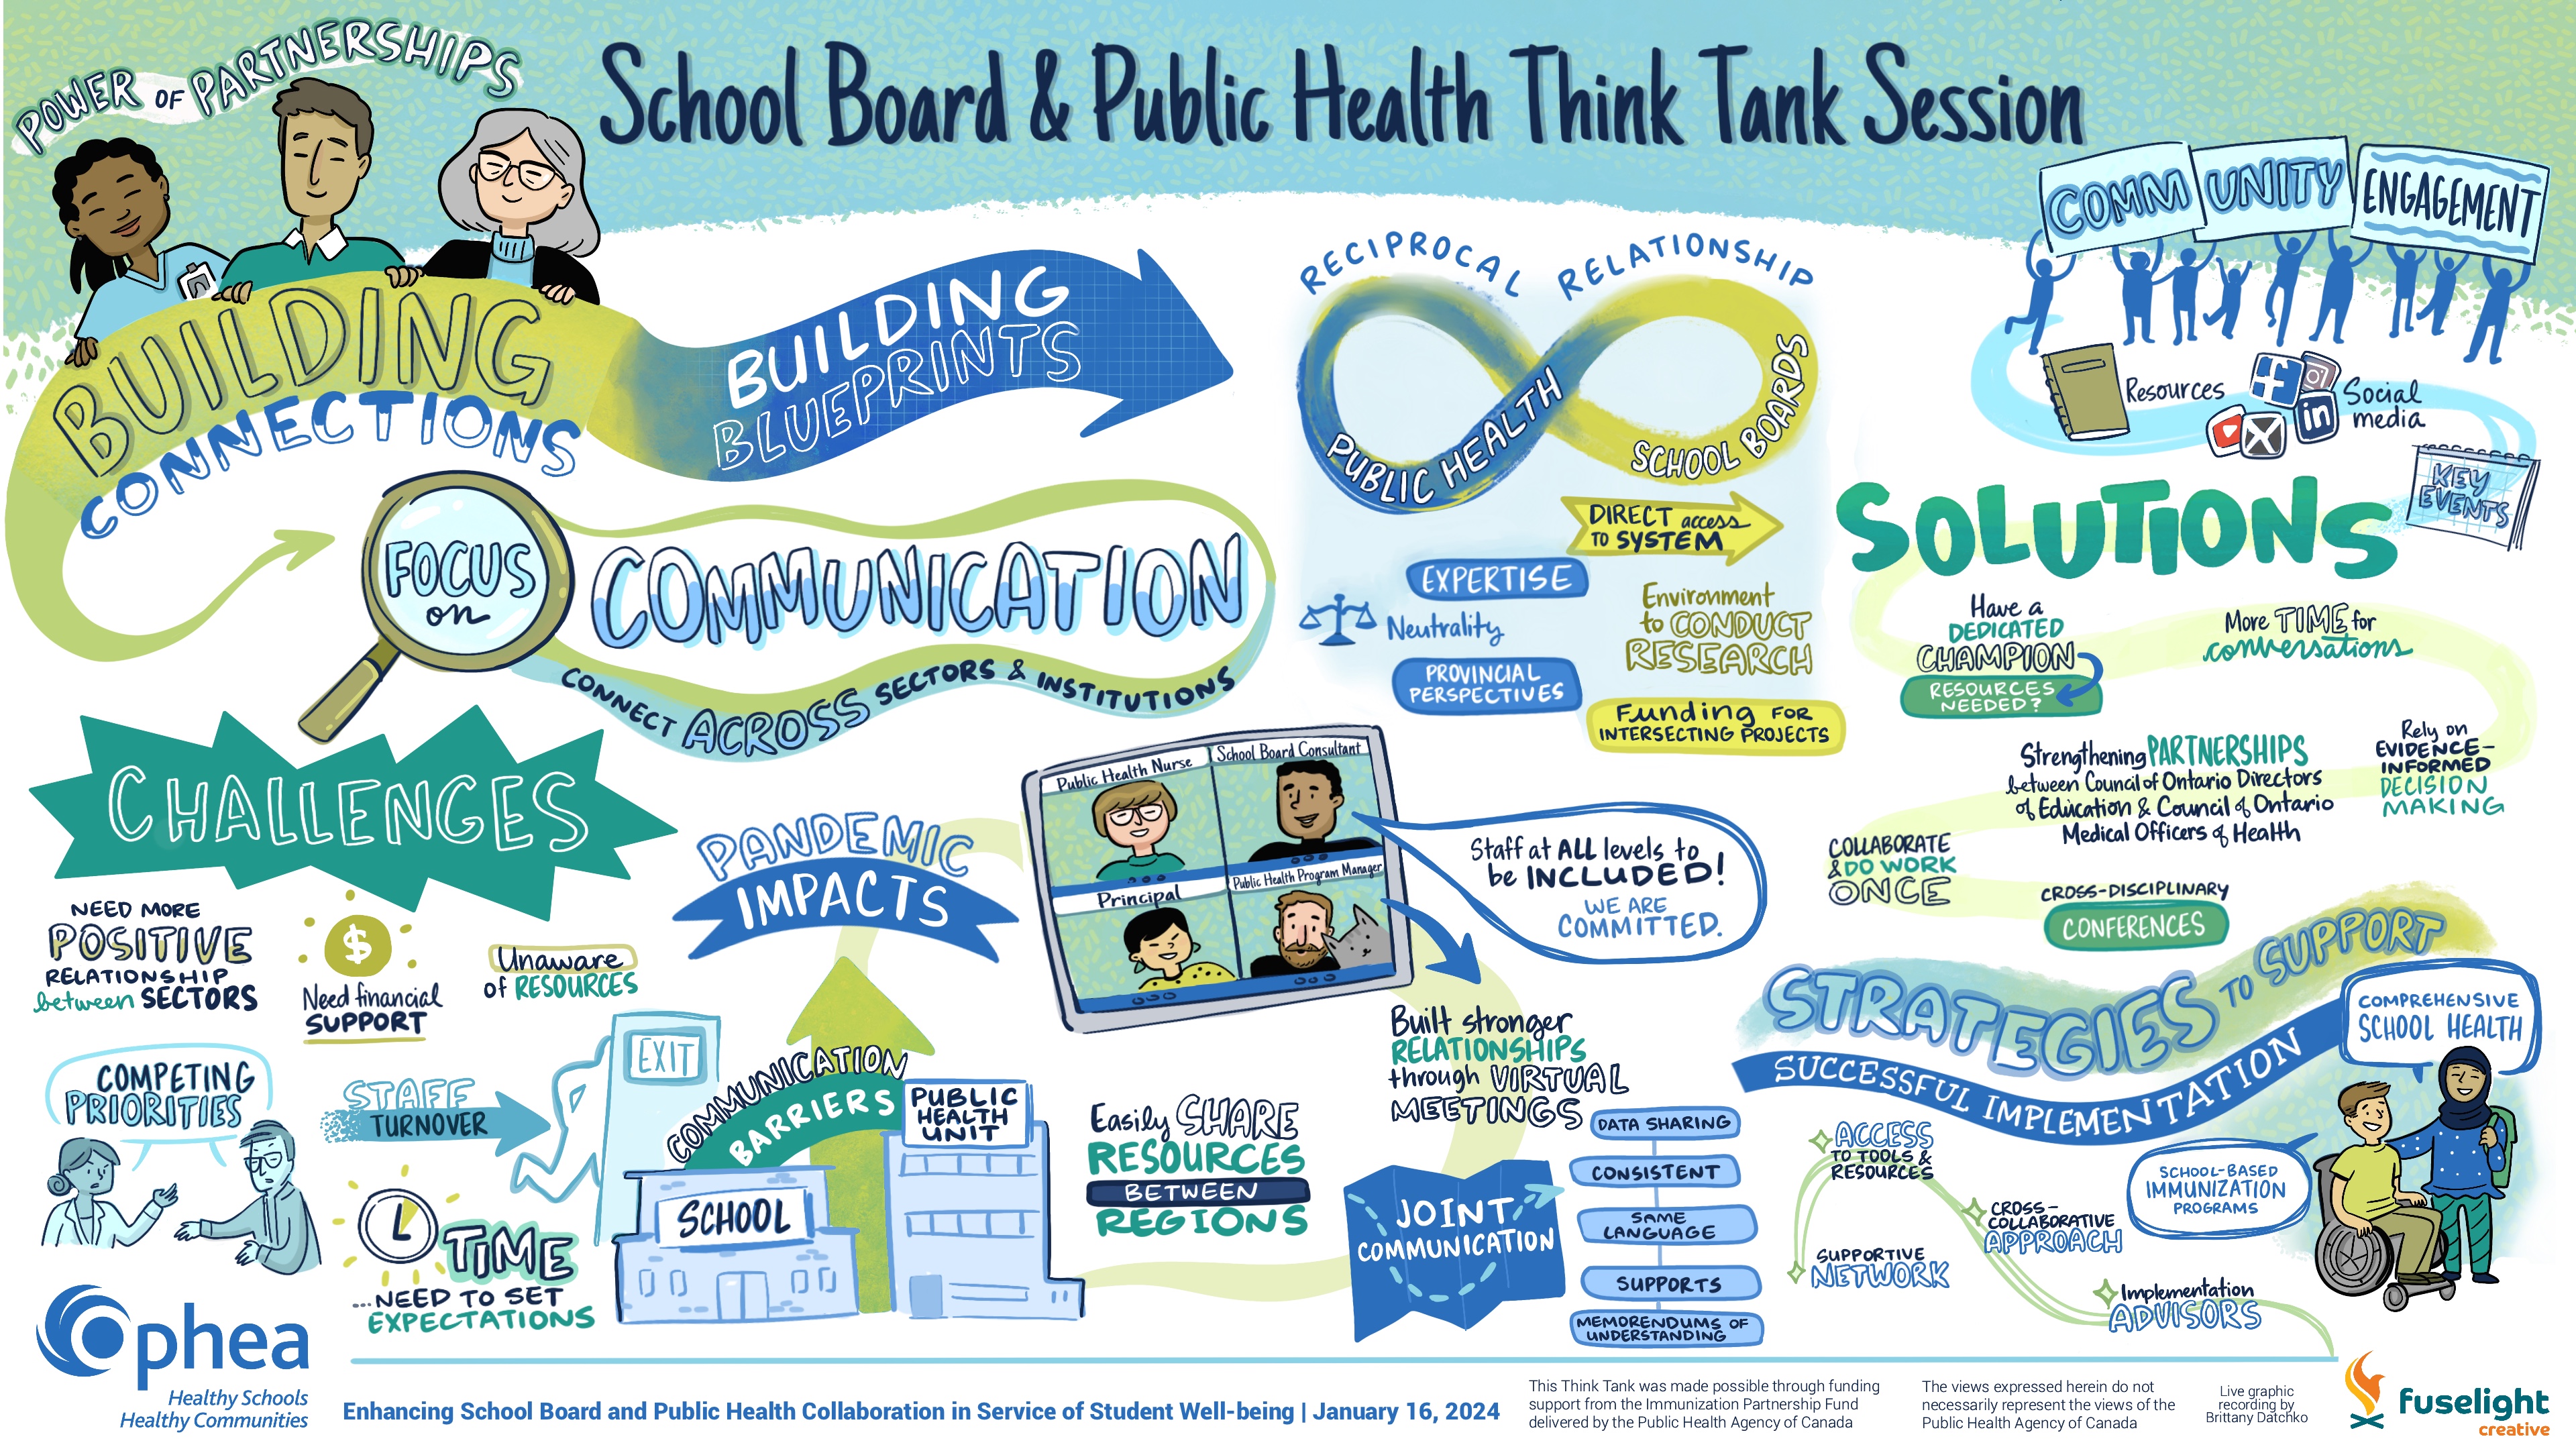 The graphic recording entitled “School Board and Public Health Think Tank Session” aims to capture the main themes and concepts shared during an interactive session highlighting the main barriers, solutions and strategies for successful school board and public health collaboration. 